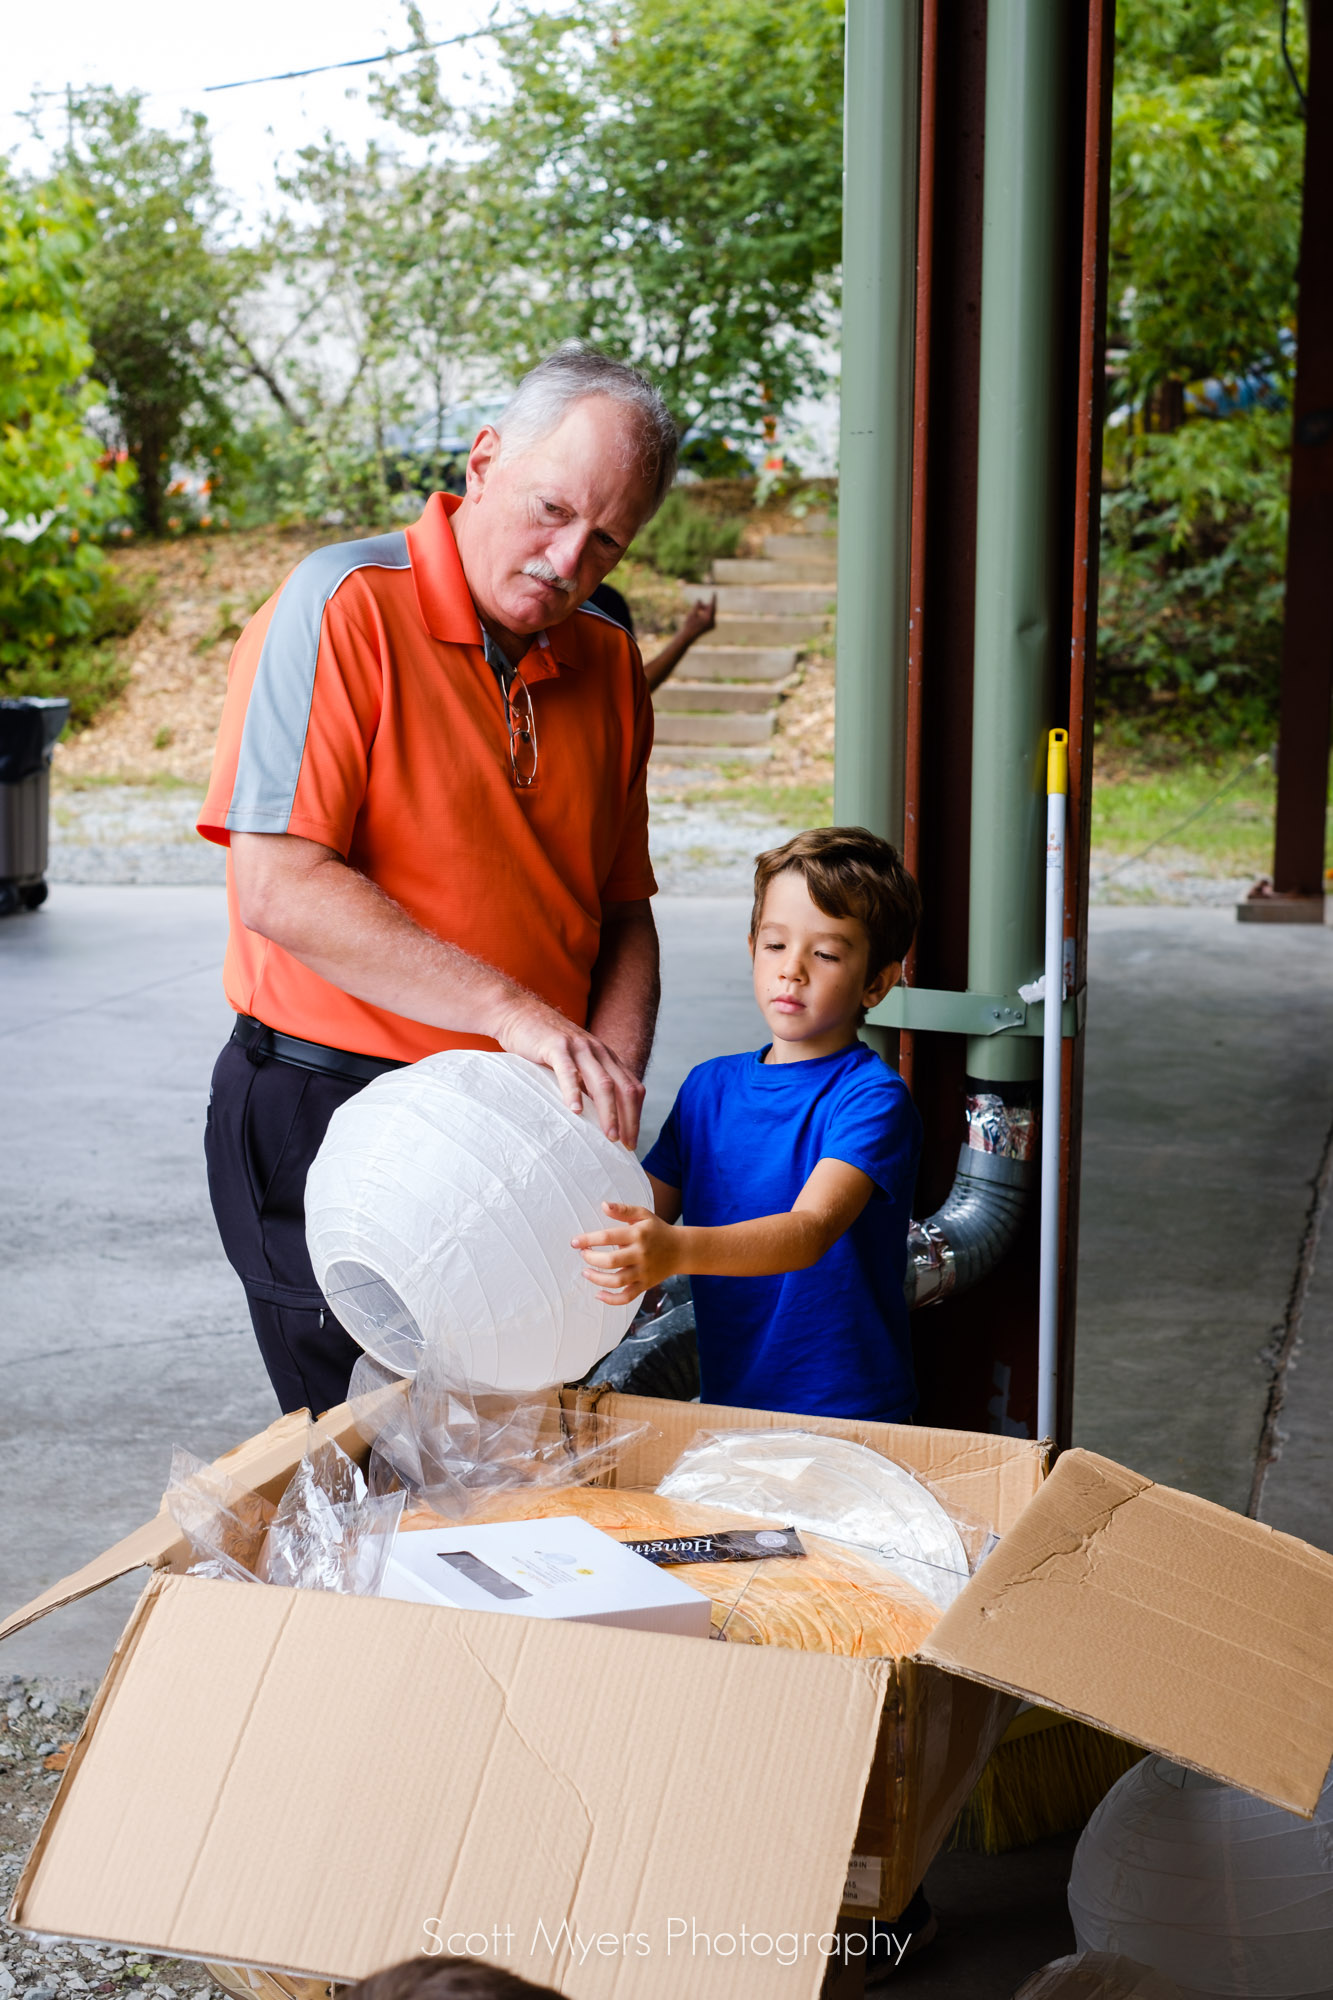 My uncle Richard, and my nephew Theodore, putting together paper lanterns